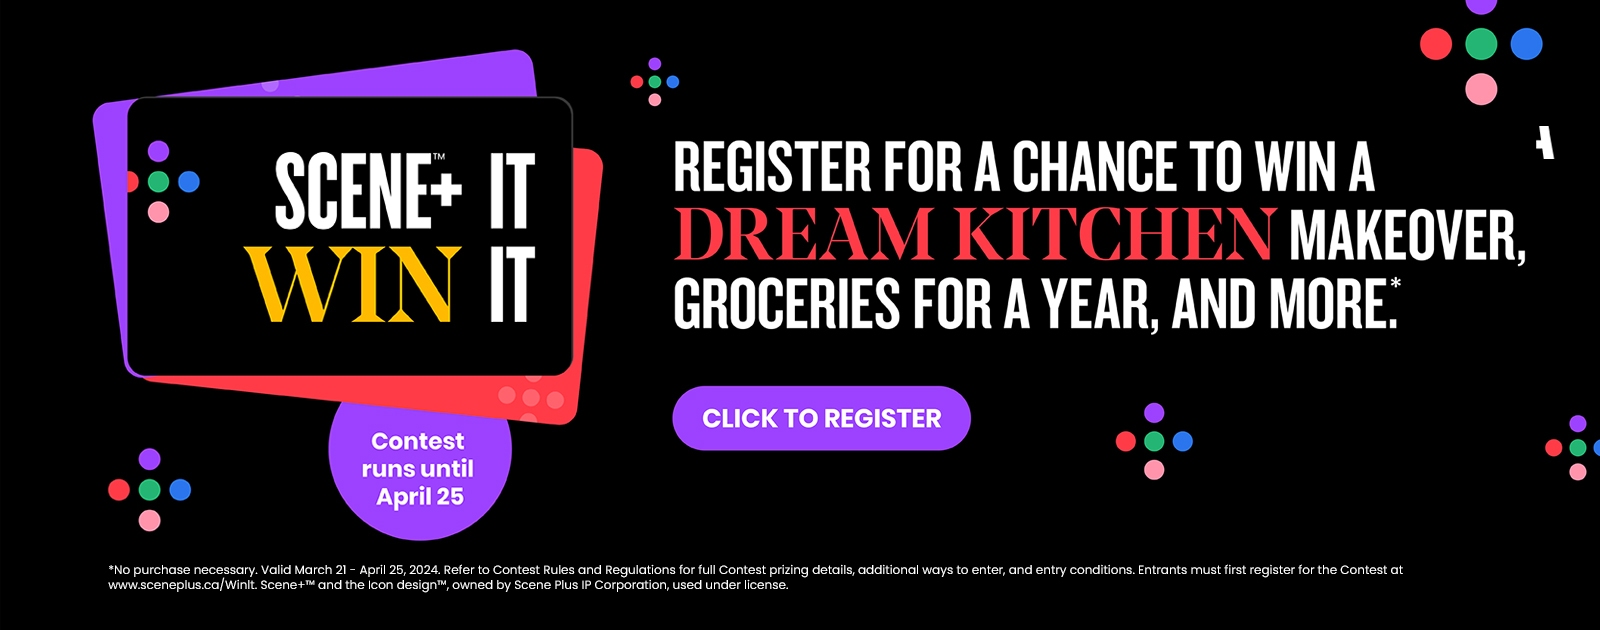 The following image contains the text, " Scene+ It Win It; contest runs until April 25. Register For a Chance to Win a Dream Kitchen Makeover, Groceries for a Year and More," along with a Click to register button.